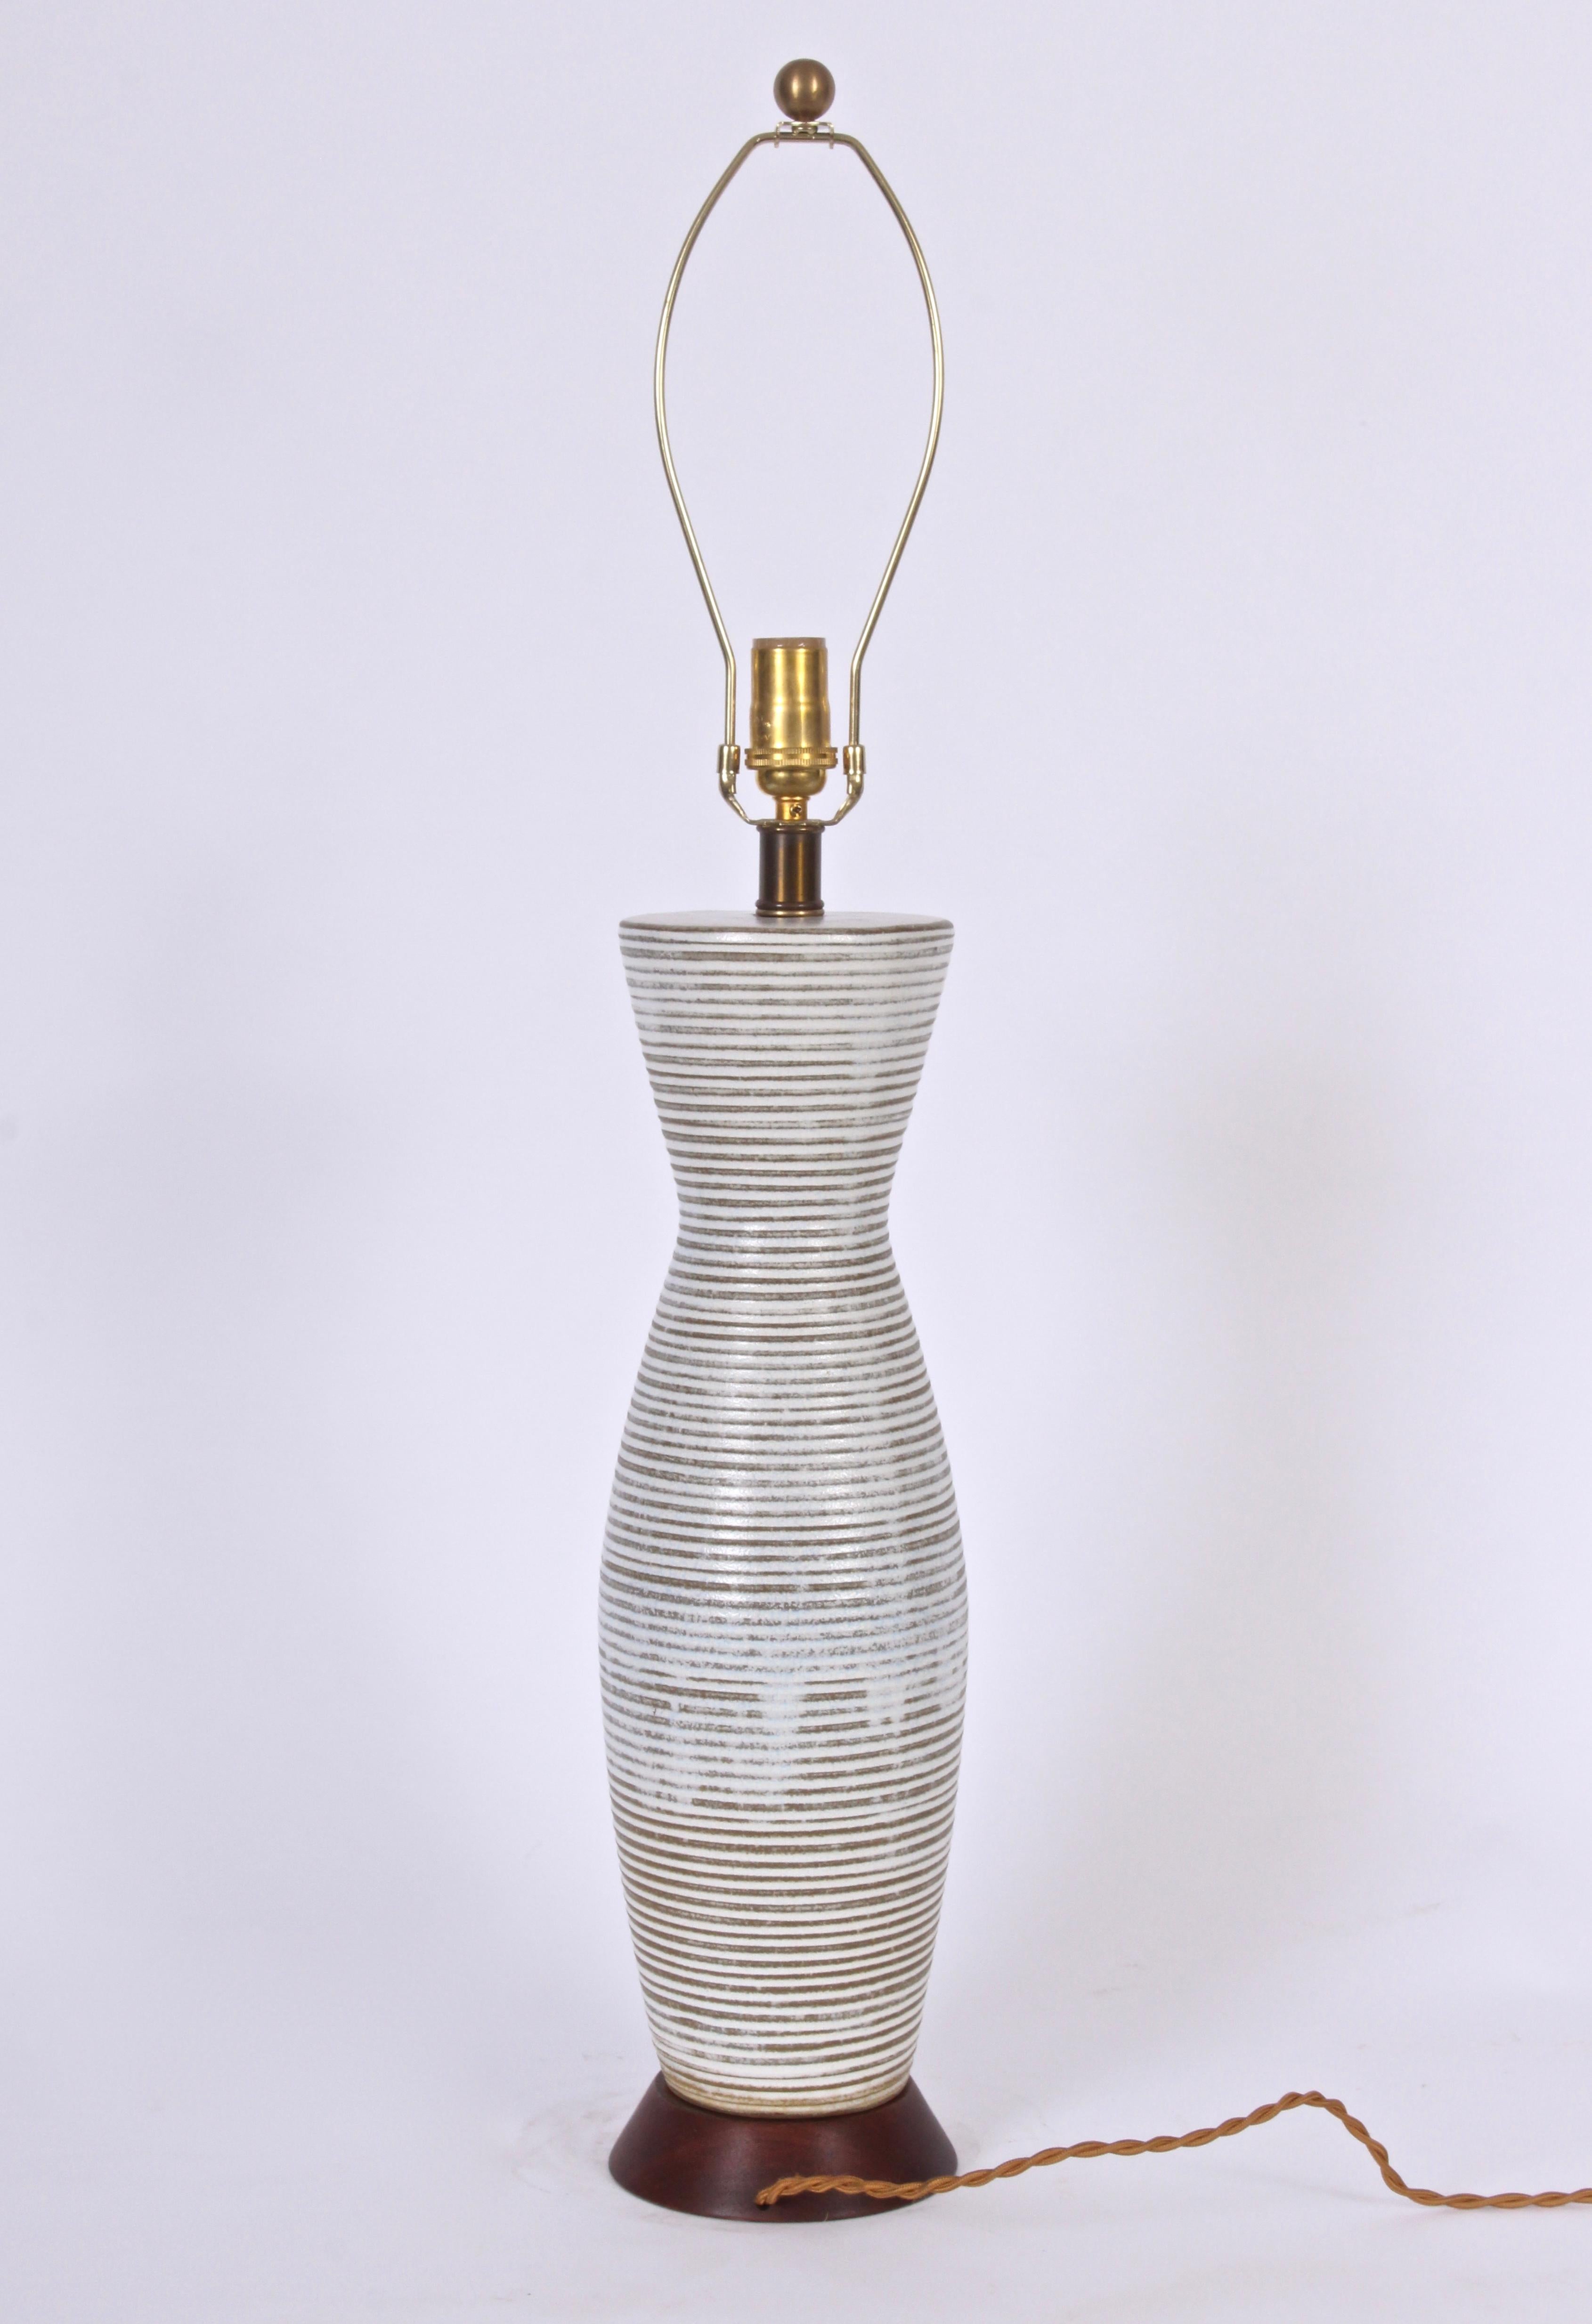 Substantial Lee Rosen for design technics white and taupe banded pottery table lamp, 1950's.Featuring a corseted bottle form with handcrafted horizontal banding in white and light brown, gray toned coloration. Glazed drip finish. Flared walnut base.